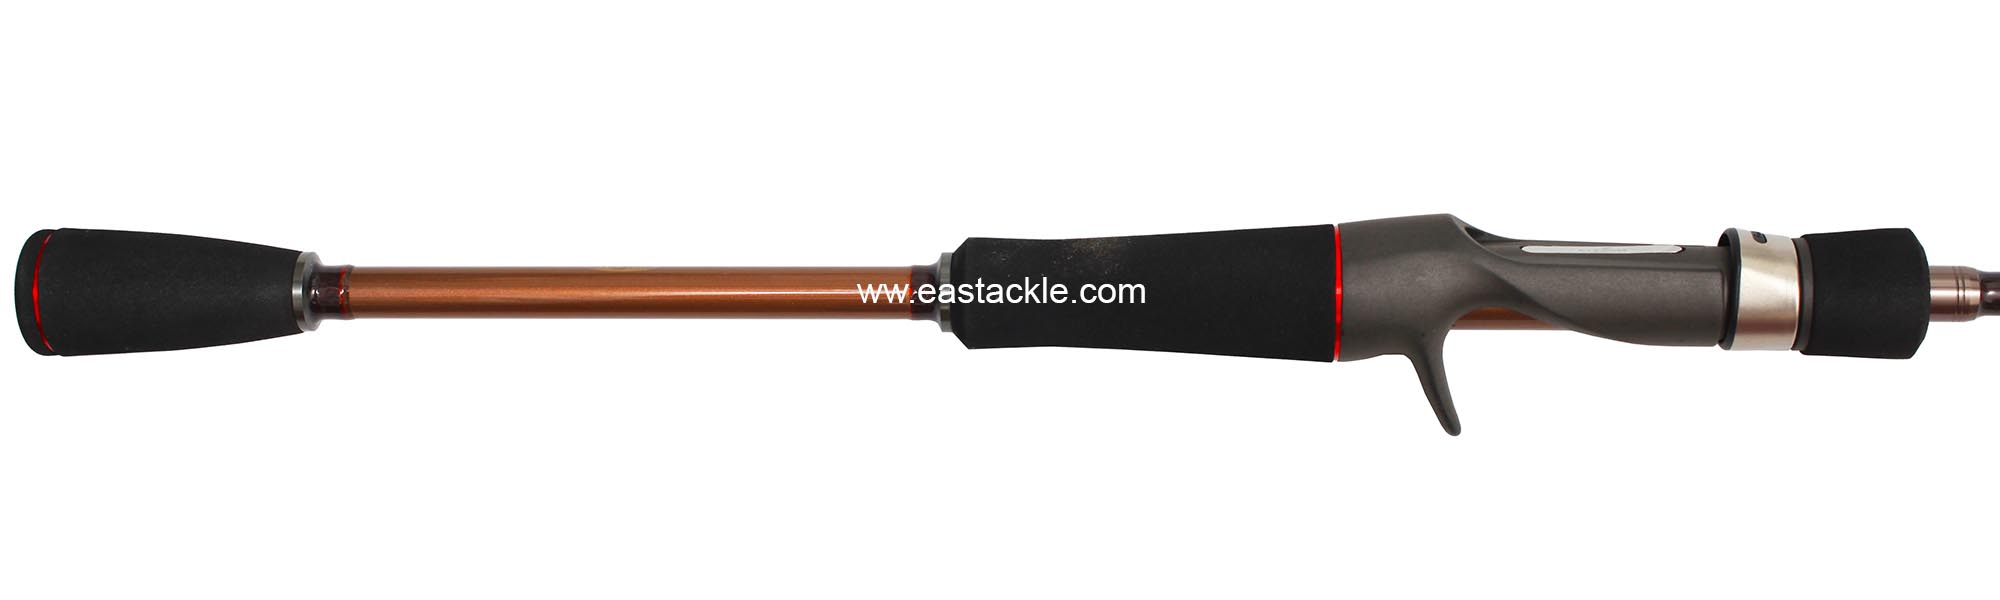 Storm - Teenie - TNC641UL - Bait Casting Rod - Handle Section (Side View) | Eastackle